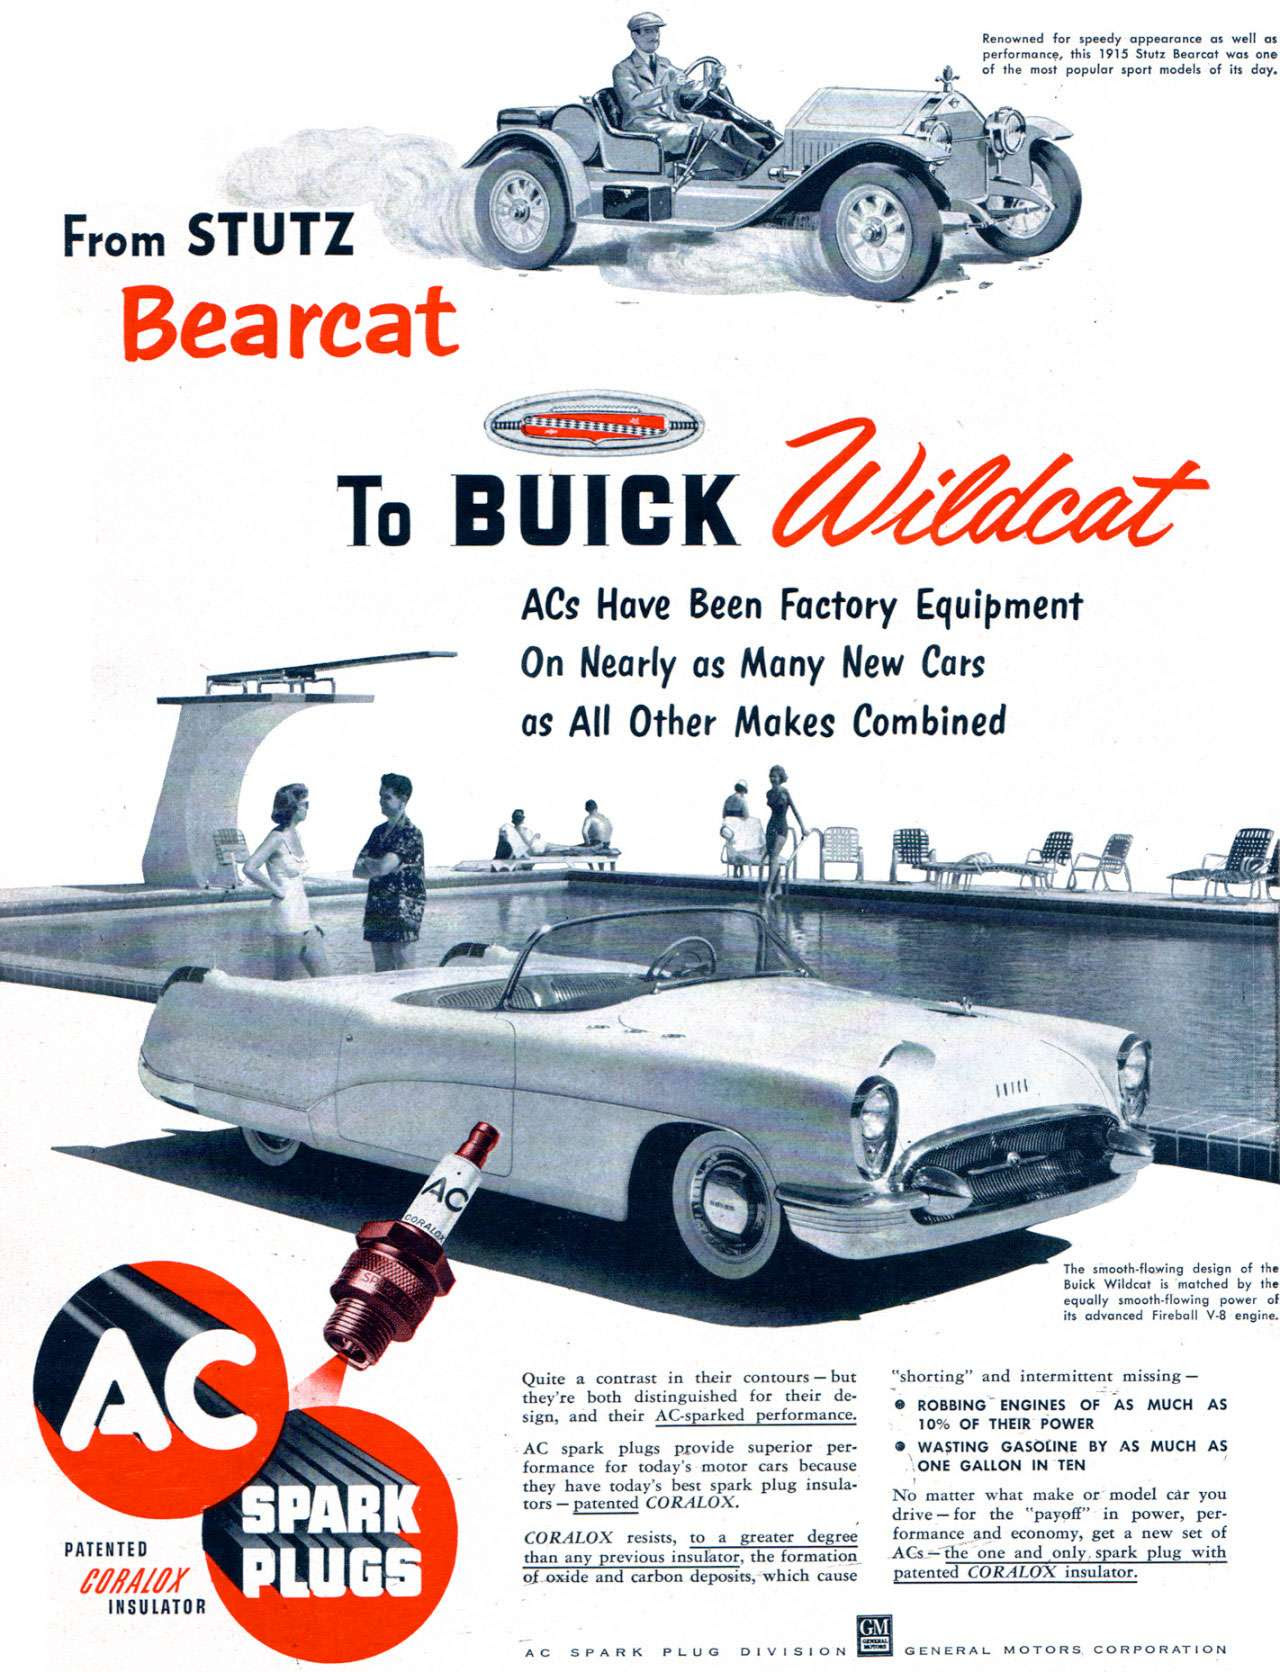 From Stutz Bearcat to Buick Wildcat, AC Spark Plugs have been factory equipment on nearly as many new cars as all other makes combined.